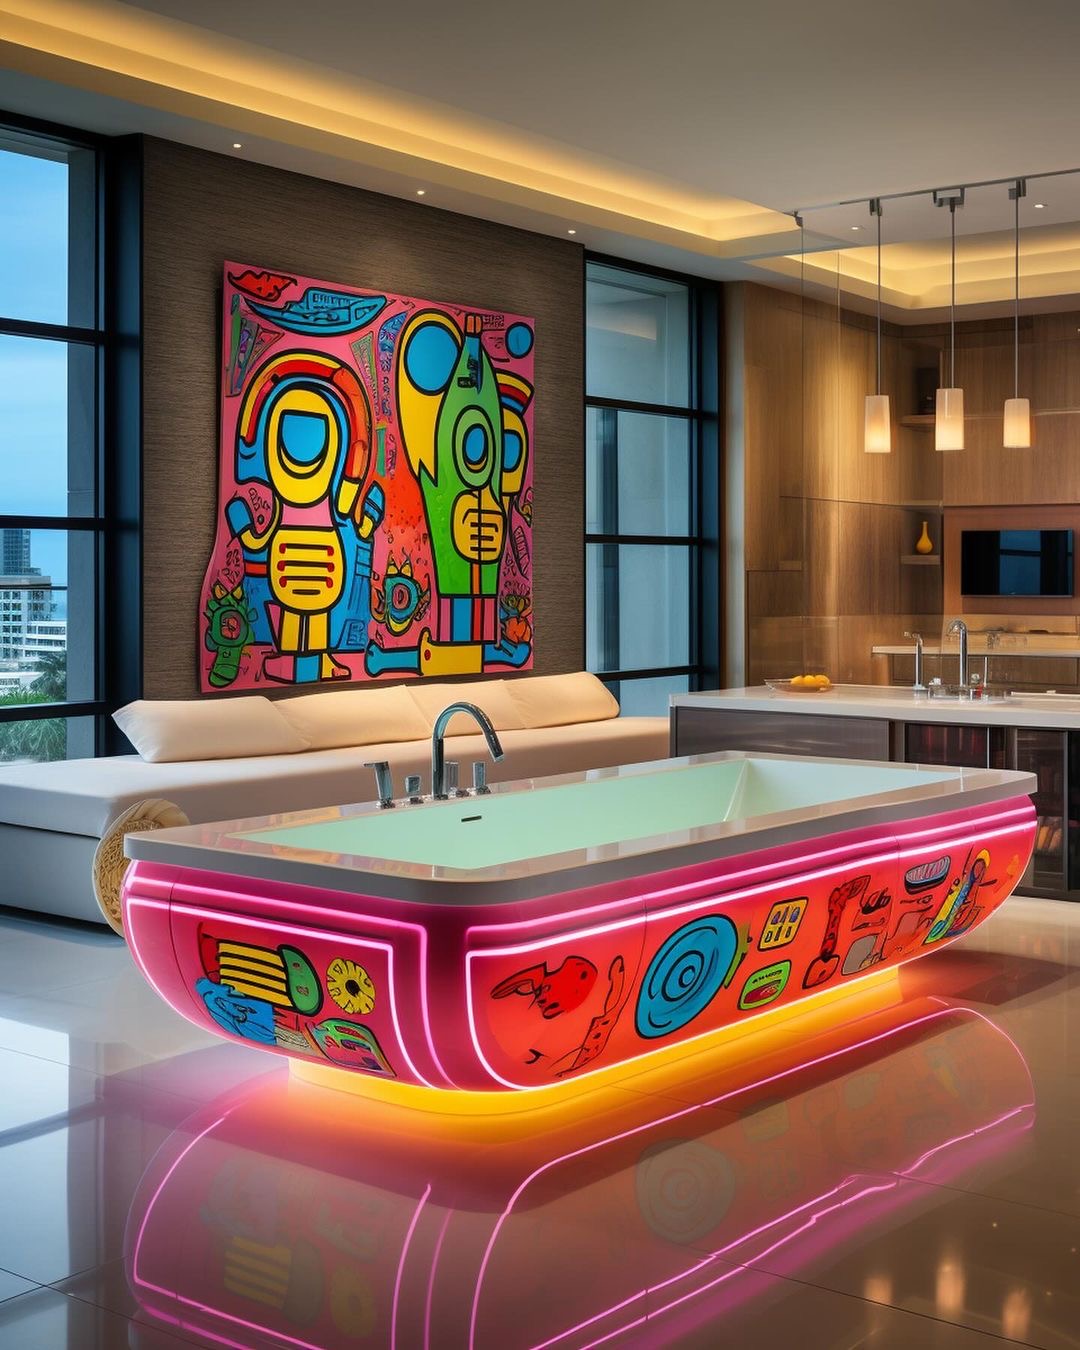 Eclectic Art in Your Modern Dream Home Spa Bathroom